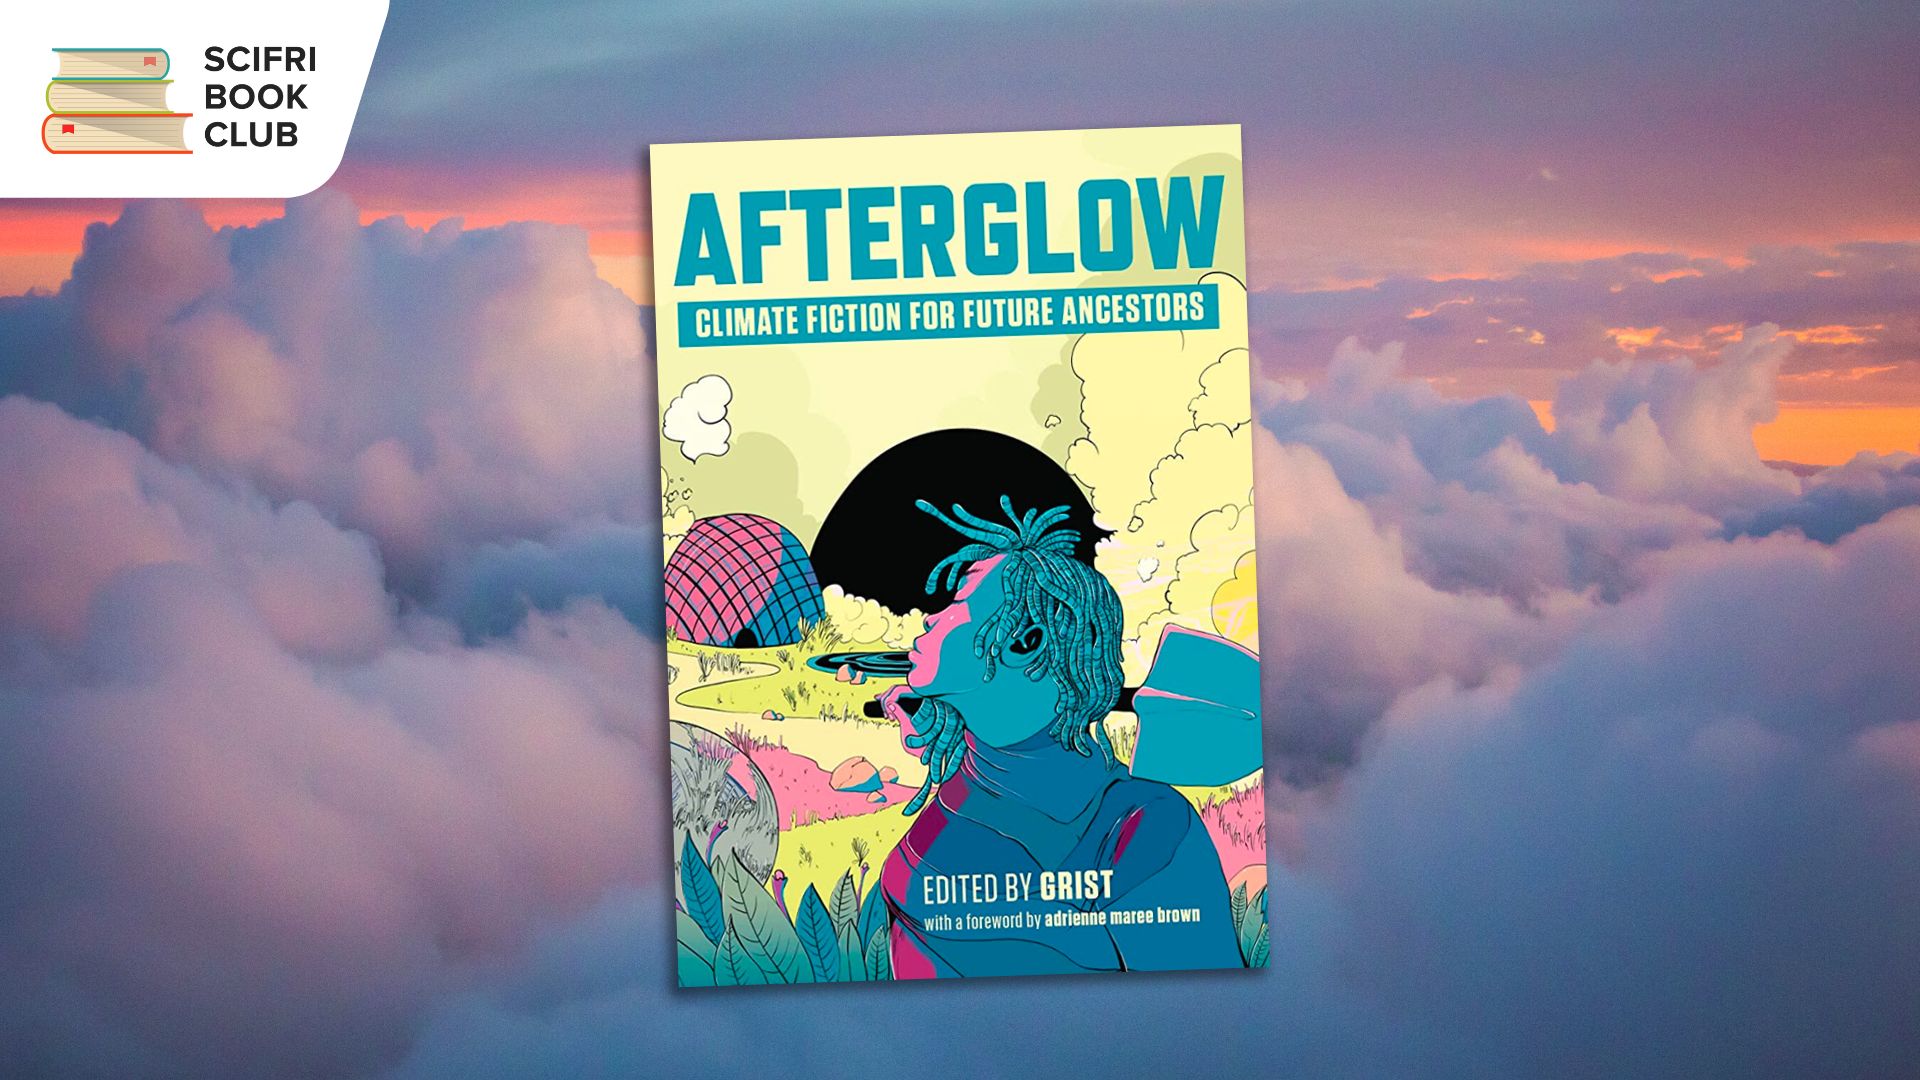 The book cover of AFTERGLOW edited by Grist, in the center, with a photo background featuring blue, purple and pink clouds at sunset taken from the skies. The logo for the SciFri Book Club in the top left corner.